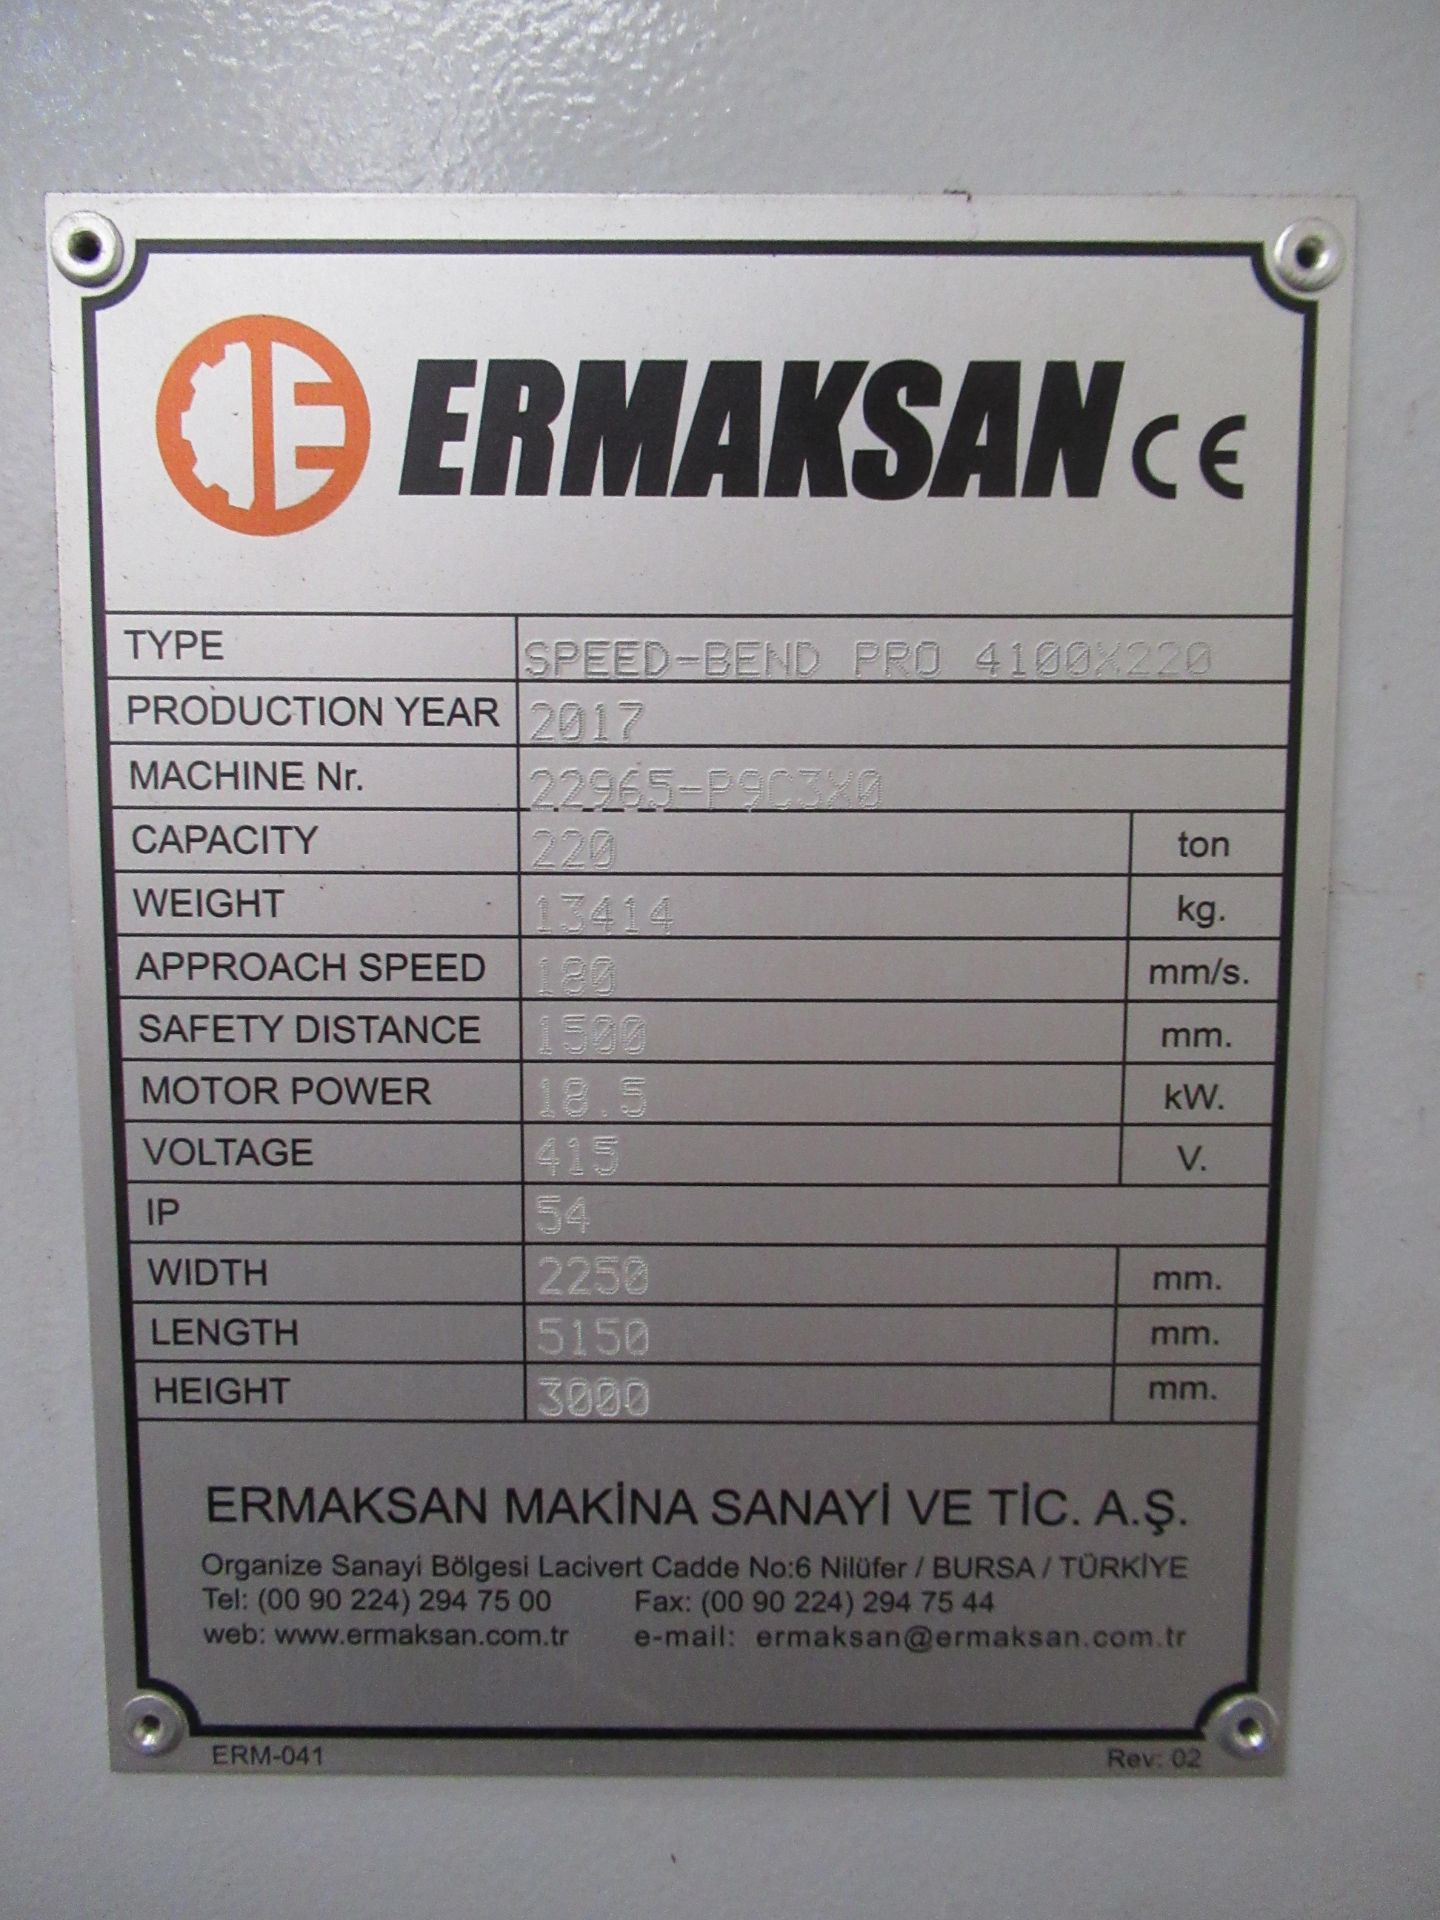 Ermaksan Speed-bend Pro 4100 x 220 CNC Hydraulic Press Brake and a selection of tooling for press br - Image 16 of 16